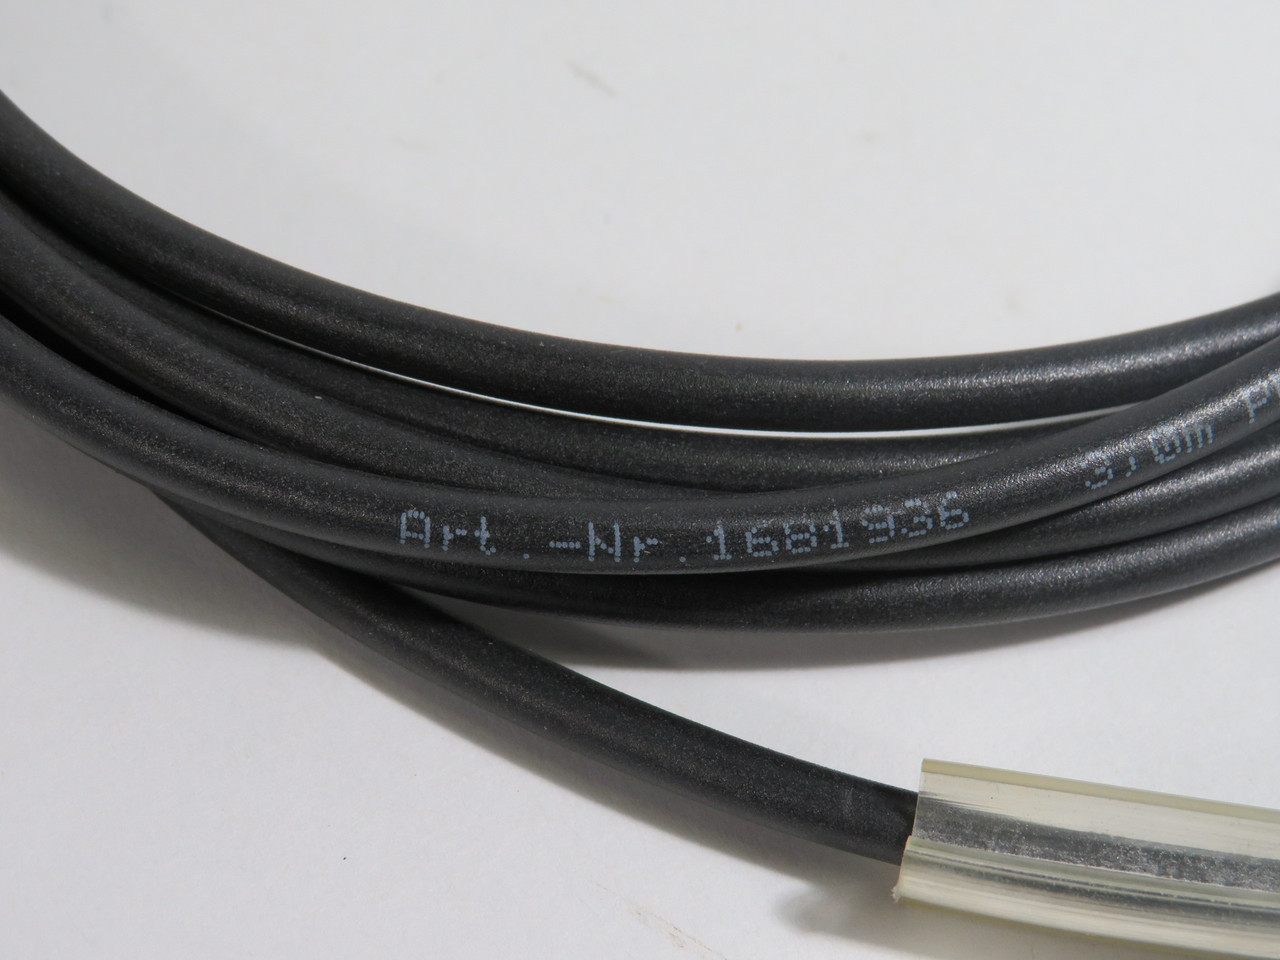 Phoenix Contact SAC-3P-M8MS/3,0-PUR/M8FS Sensor Cable 3 Position USED